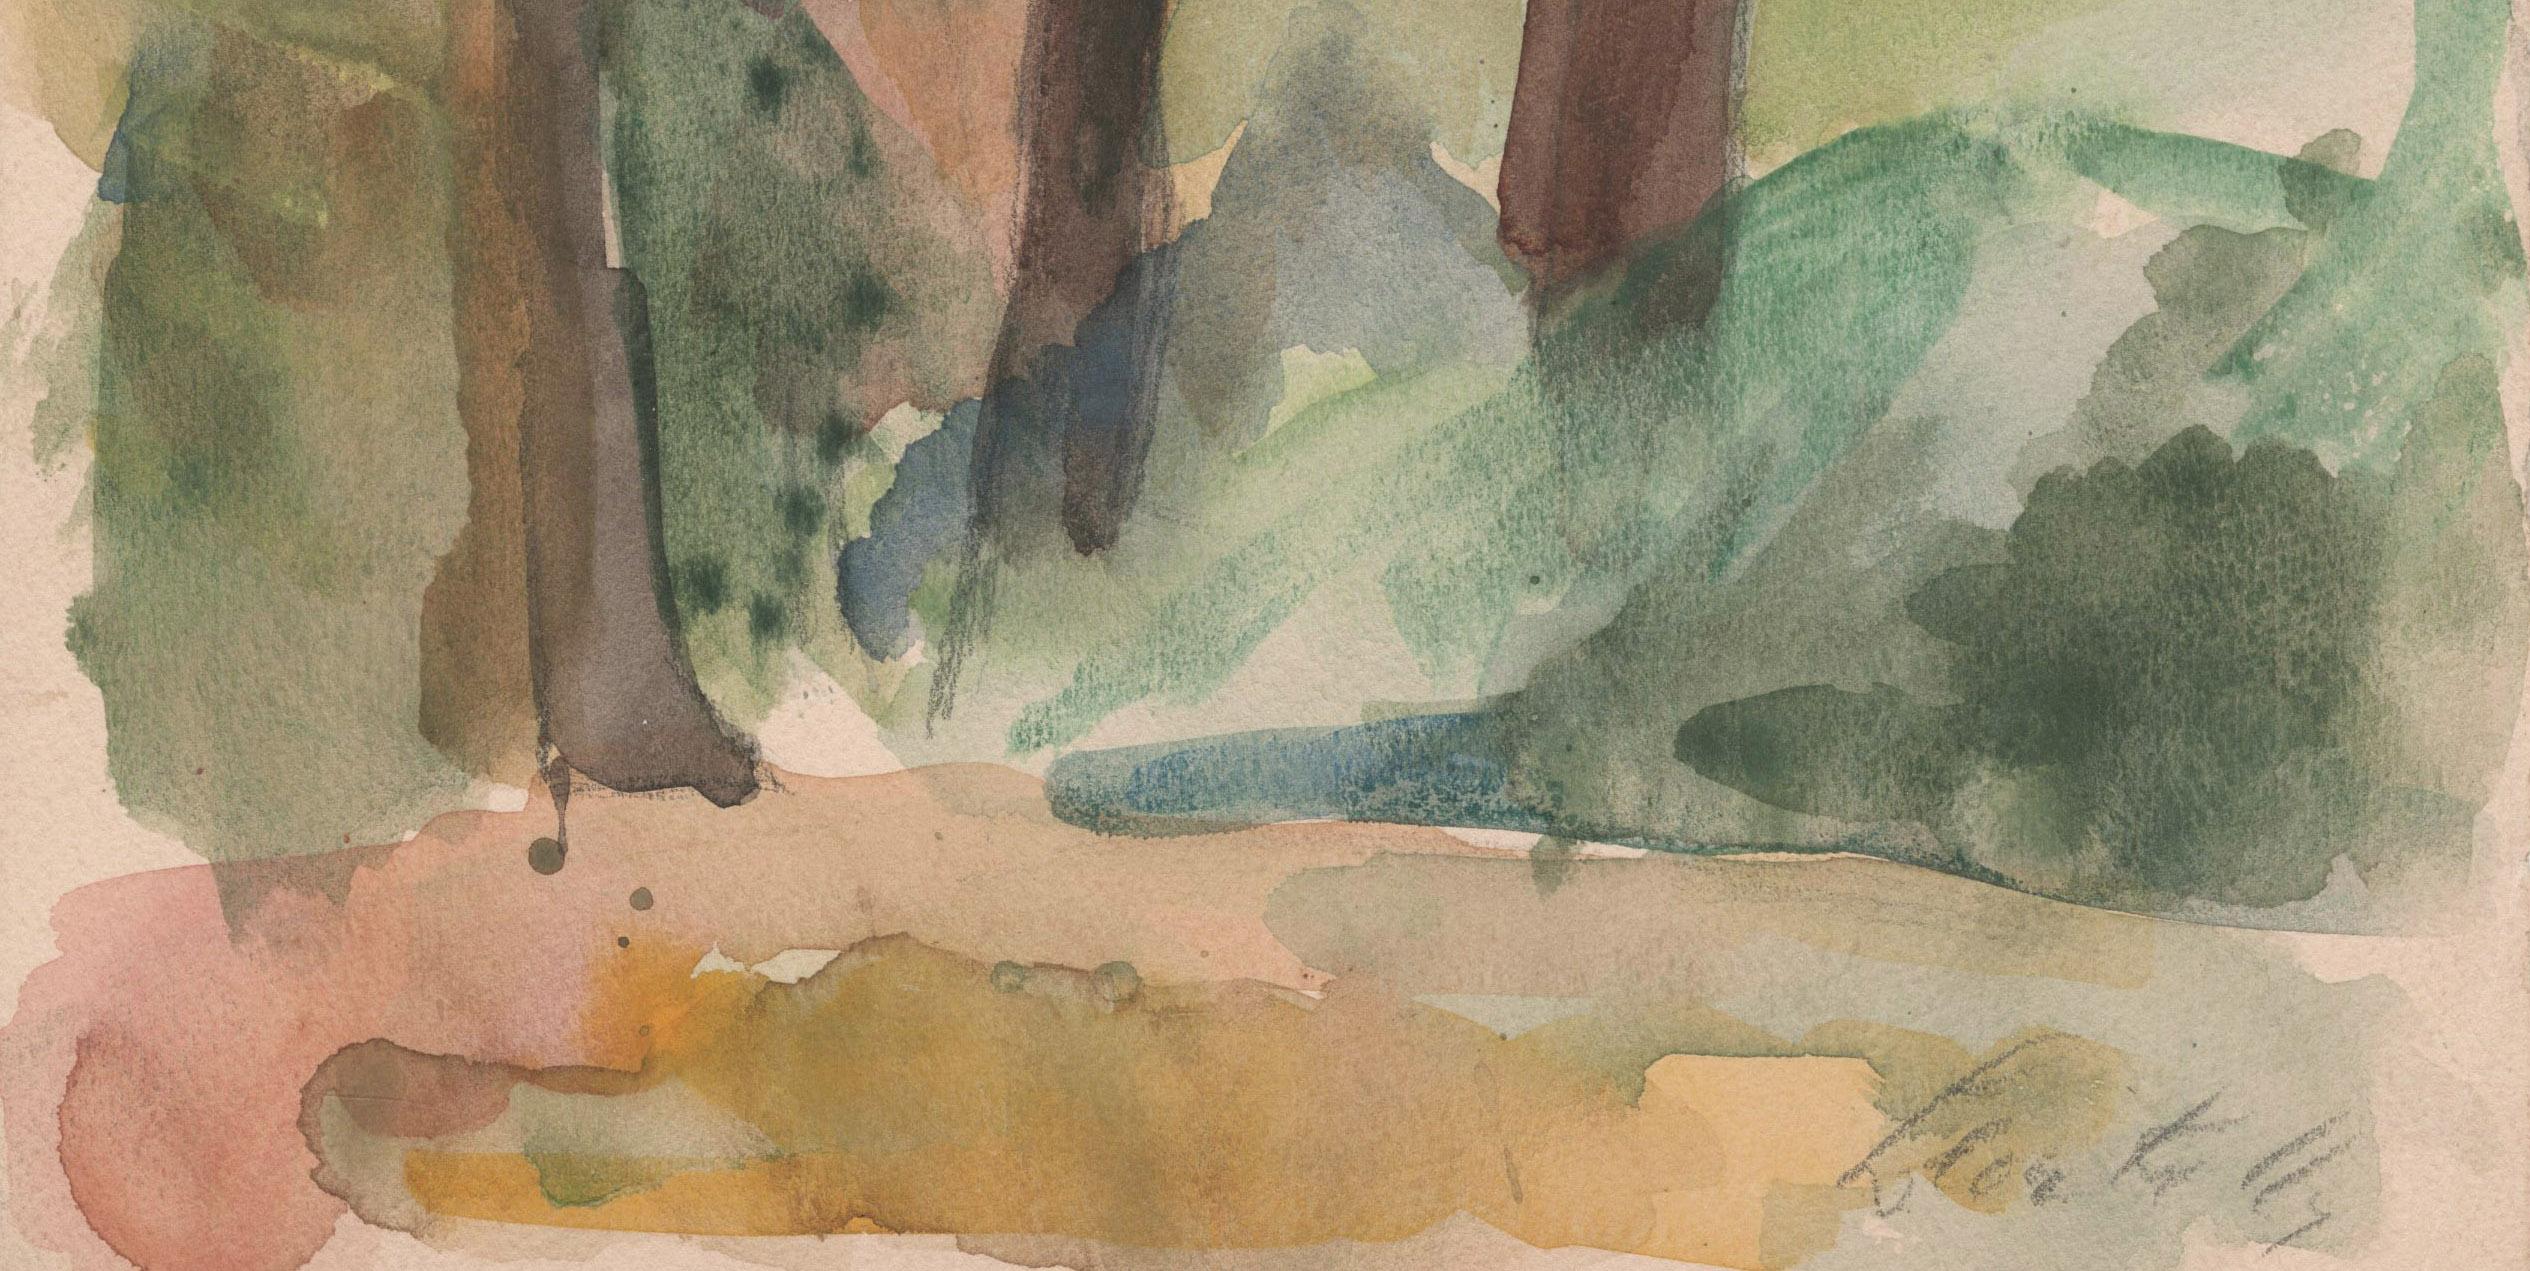 Landscape with Trees
Watercolor on paper, 1929
Signed in pencil lower right corner
Obviously influenced by the Cezanne works in the collection of his patron Alfred C. Barnes of Philadelphia.
Provenance: Estate of the Artist
                     